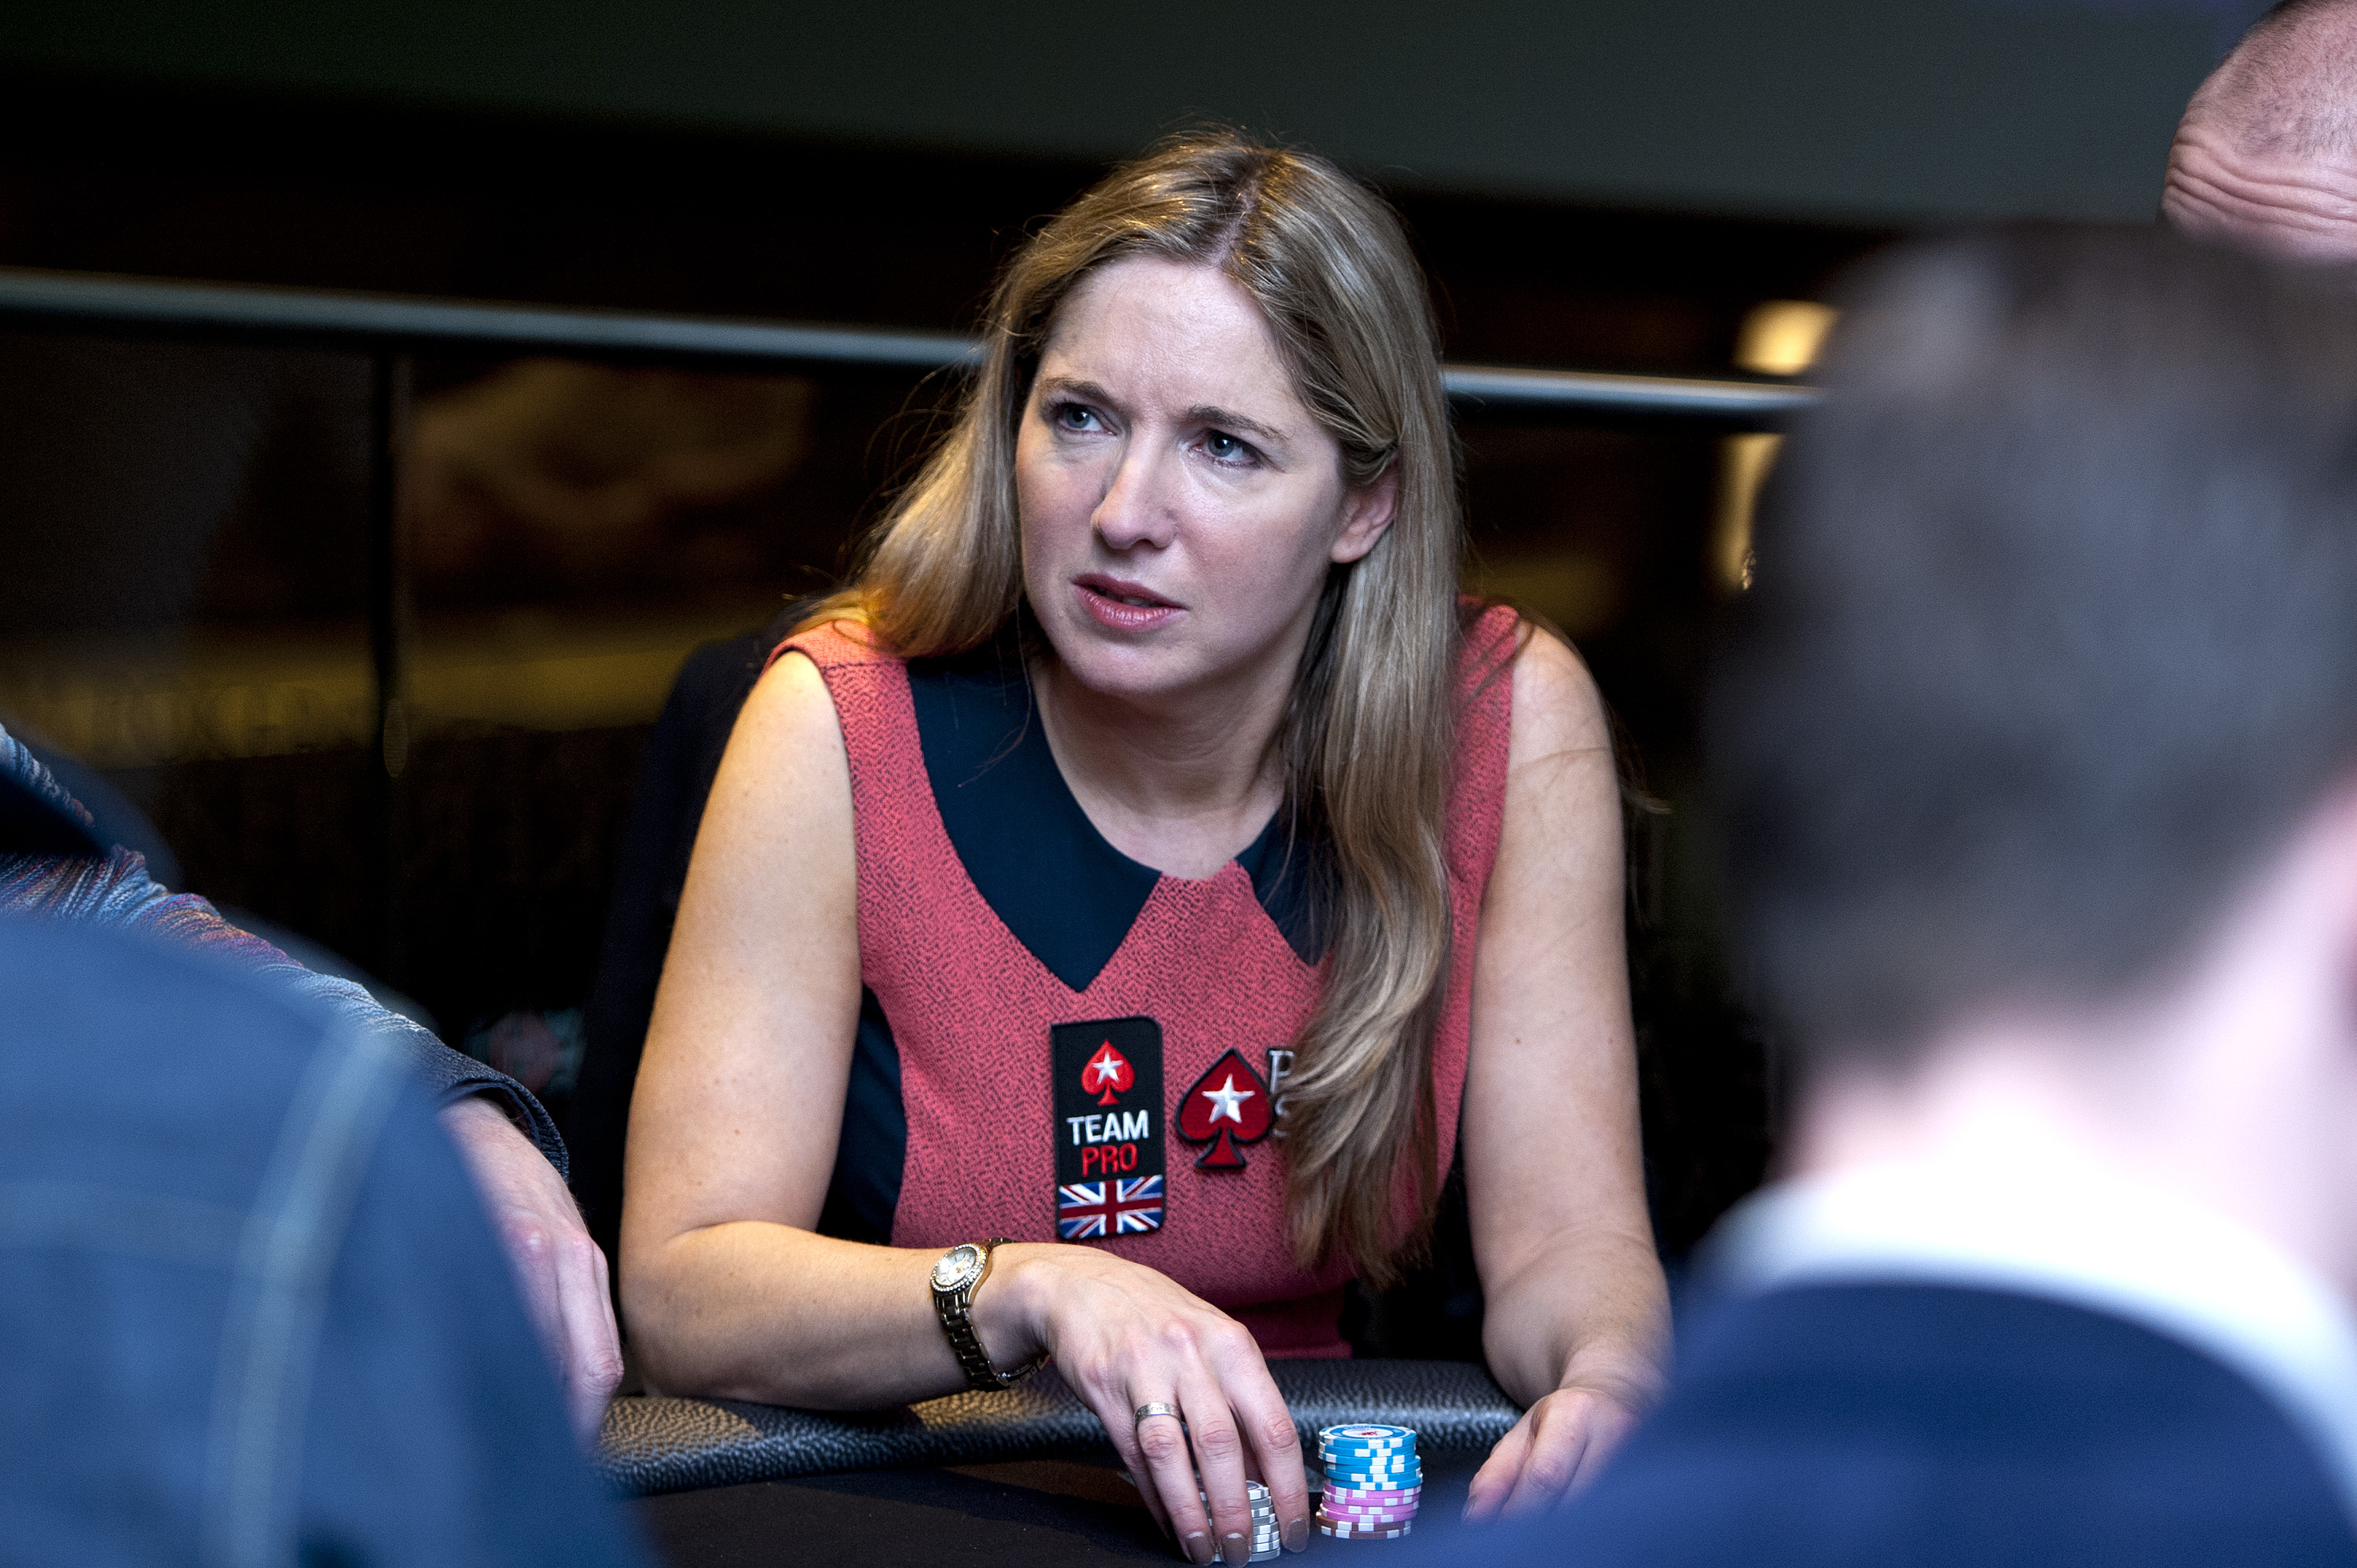 Victoria Coren Mitchell attends the launch of The PokerStars LIVE Lounge at The Hippodrome Casino London on March 4, 2013 in London, England (Ben Pruchnie--2013 Getty Images)